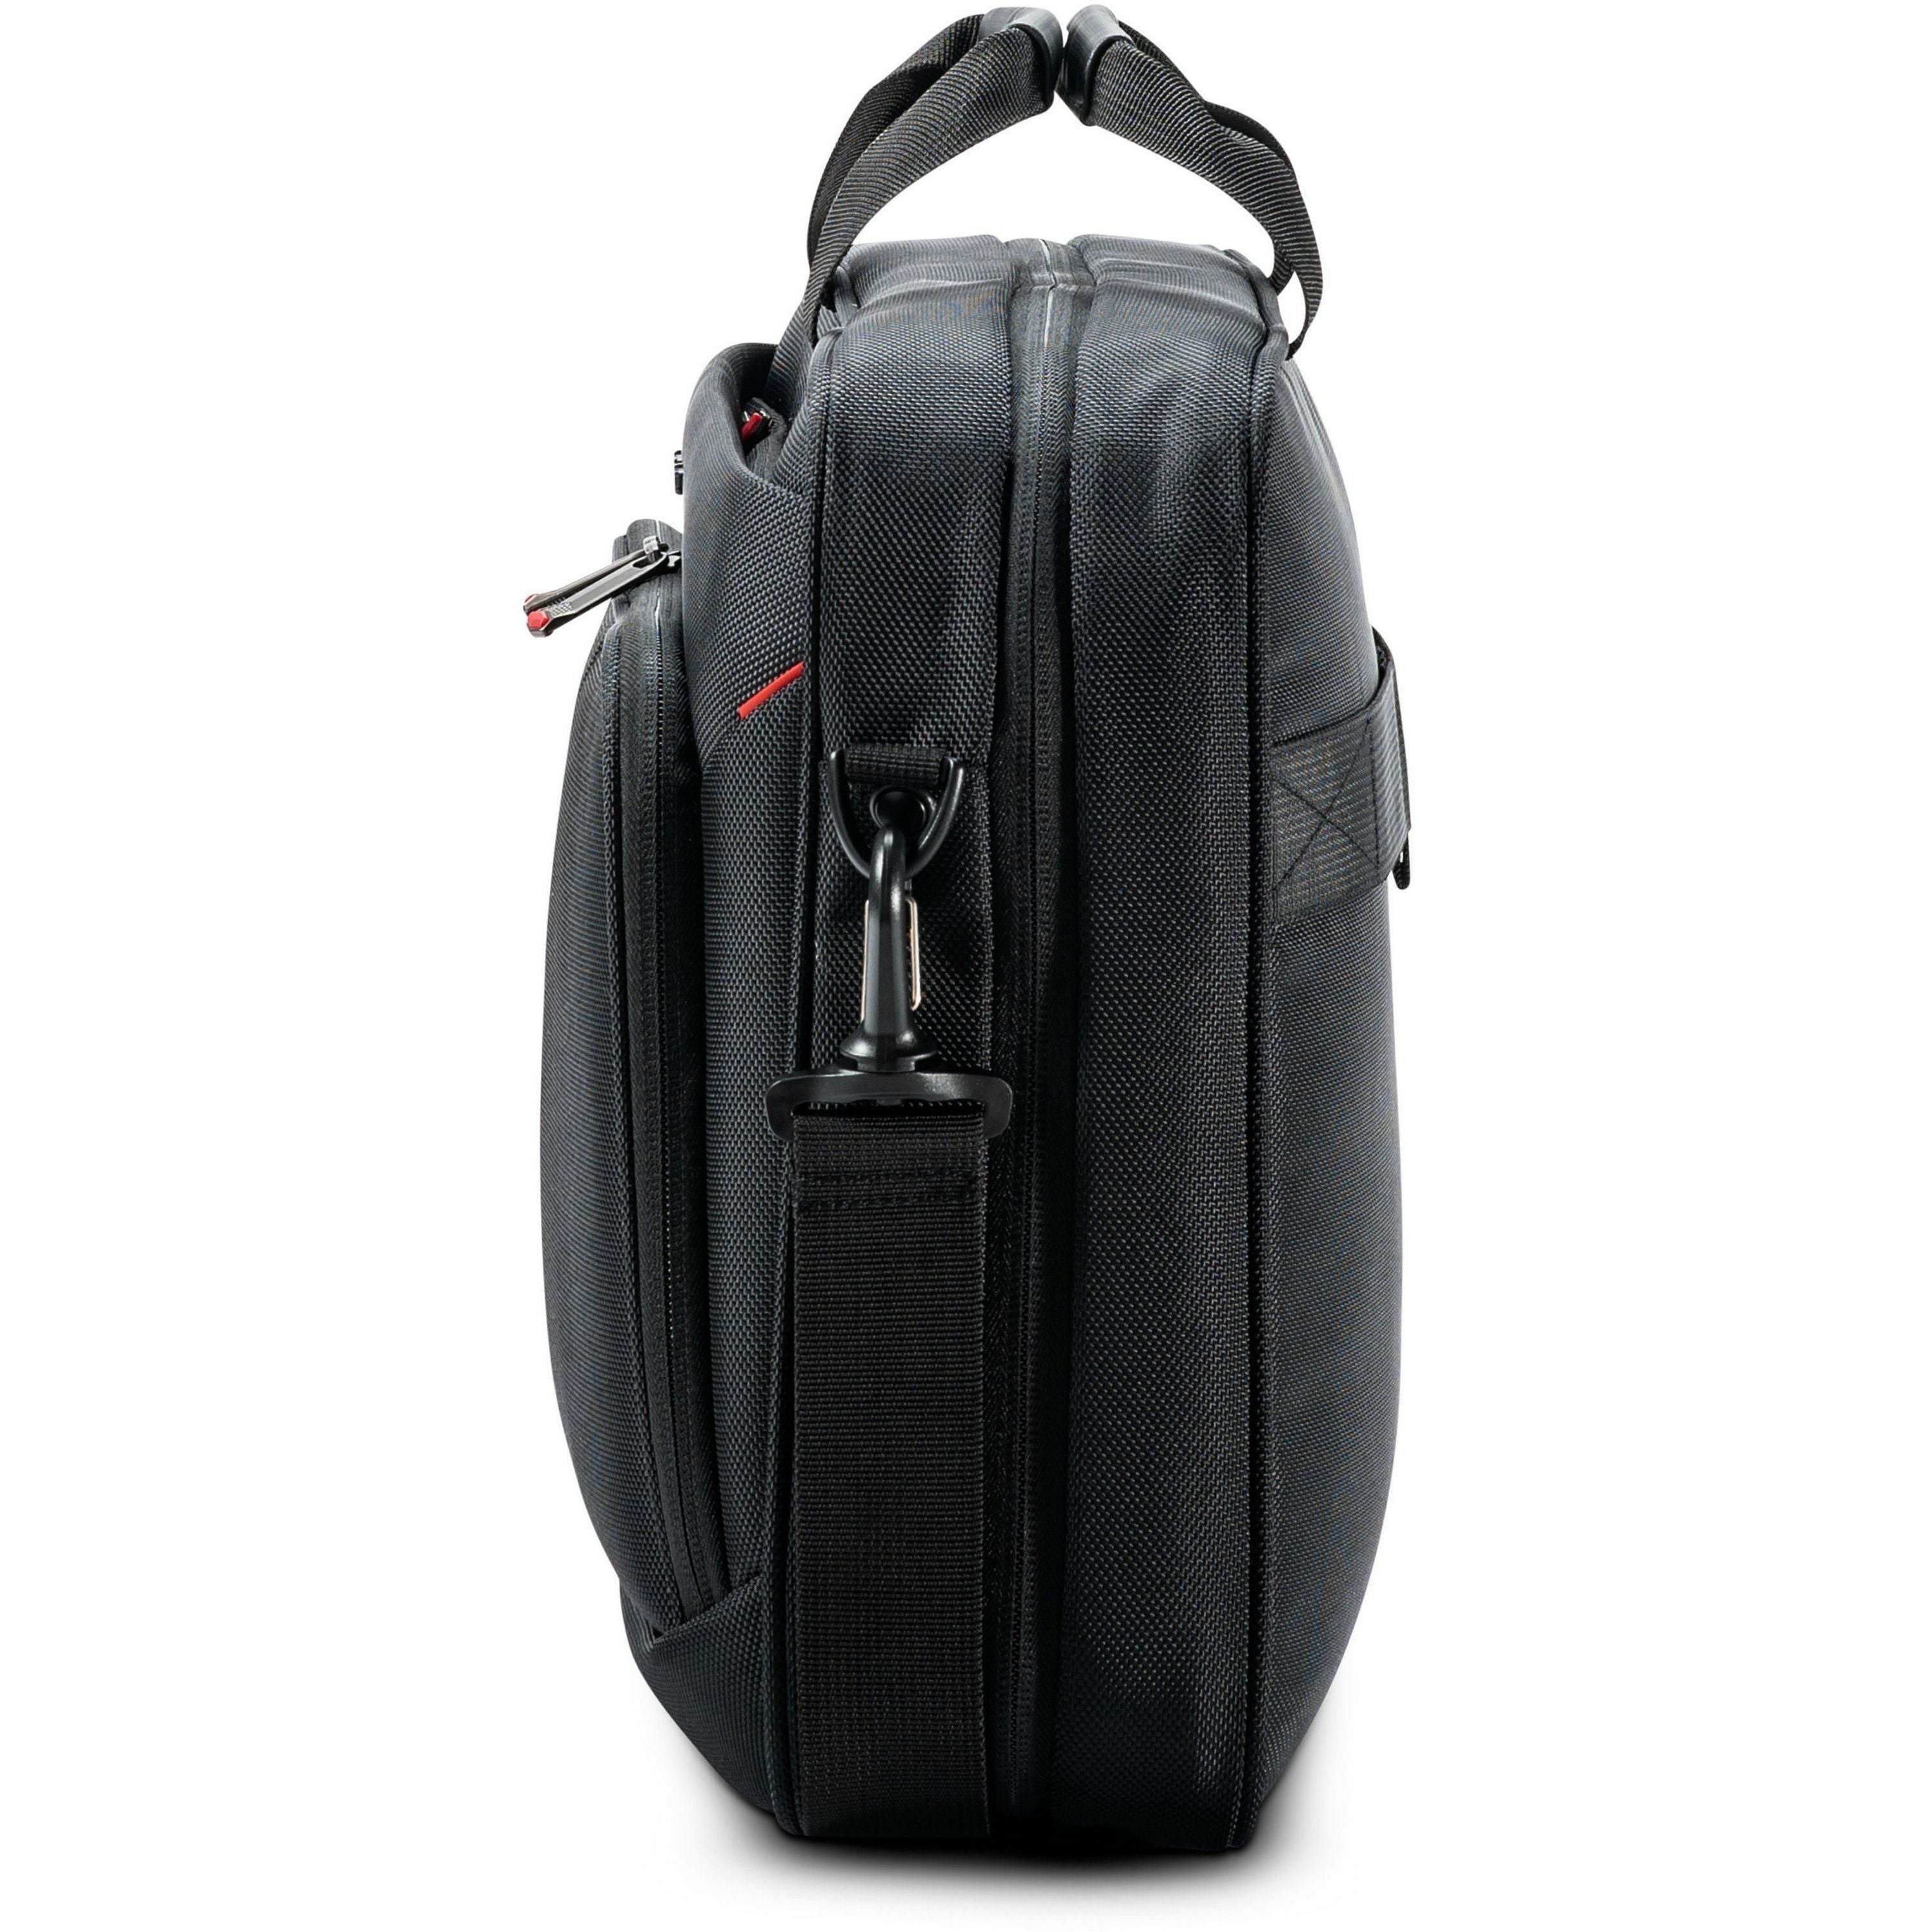 samsonite-xenon-40-carrying-case-briefcase-for-129-to-156-notebook-tablet-travel-electronics-black-1680d-ballistic-polyester-tricot-body-trolley-strap-55-height-x-125-width-x-17-depth-1-each_sml1473271041 - 5